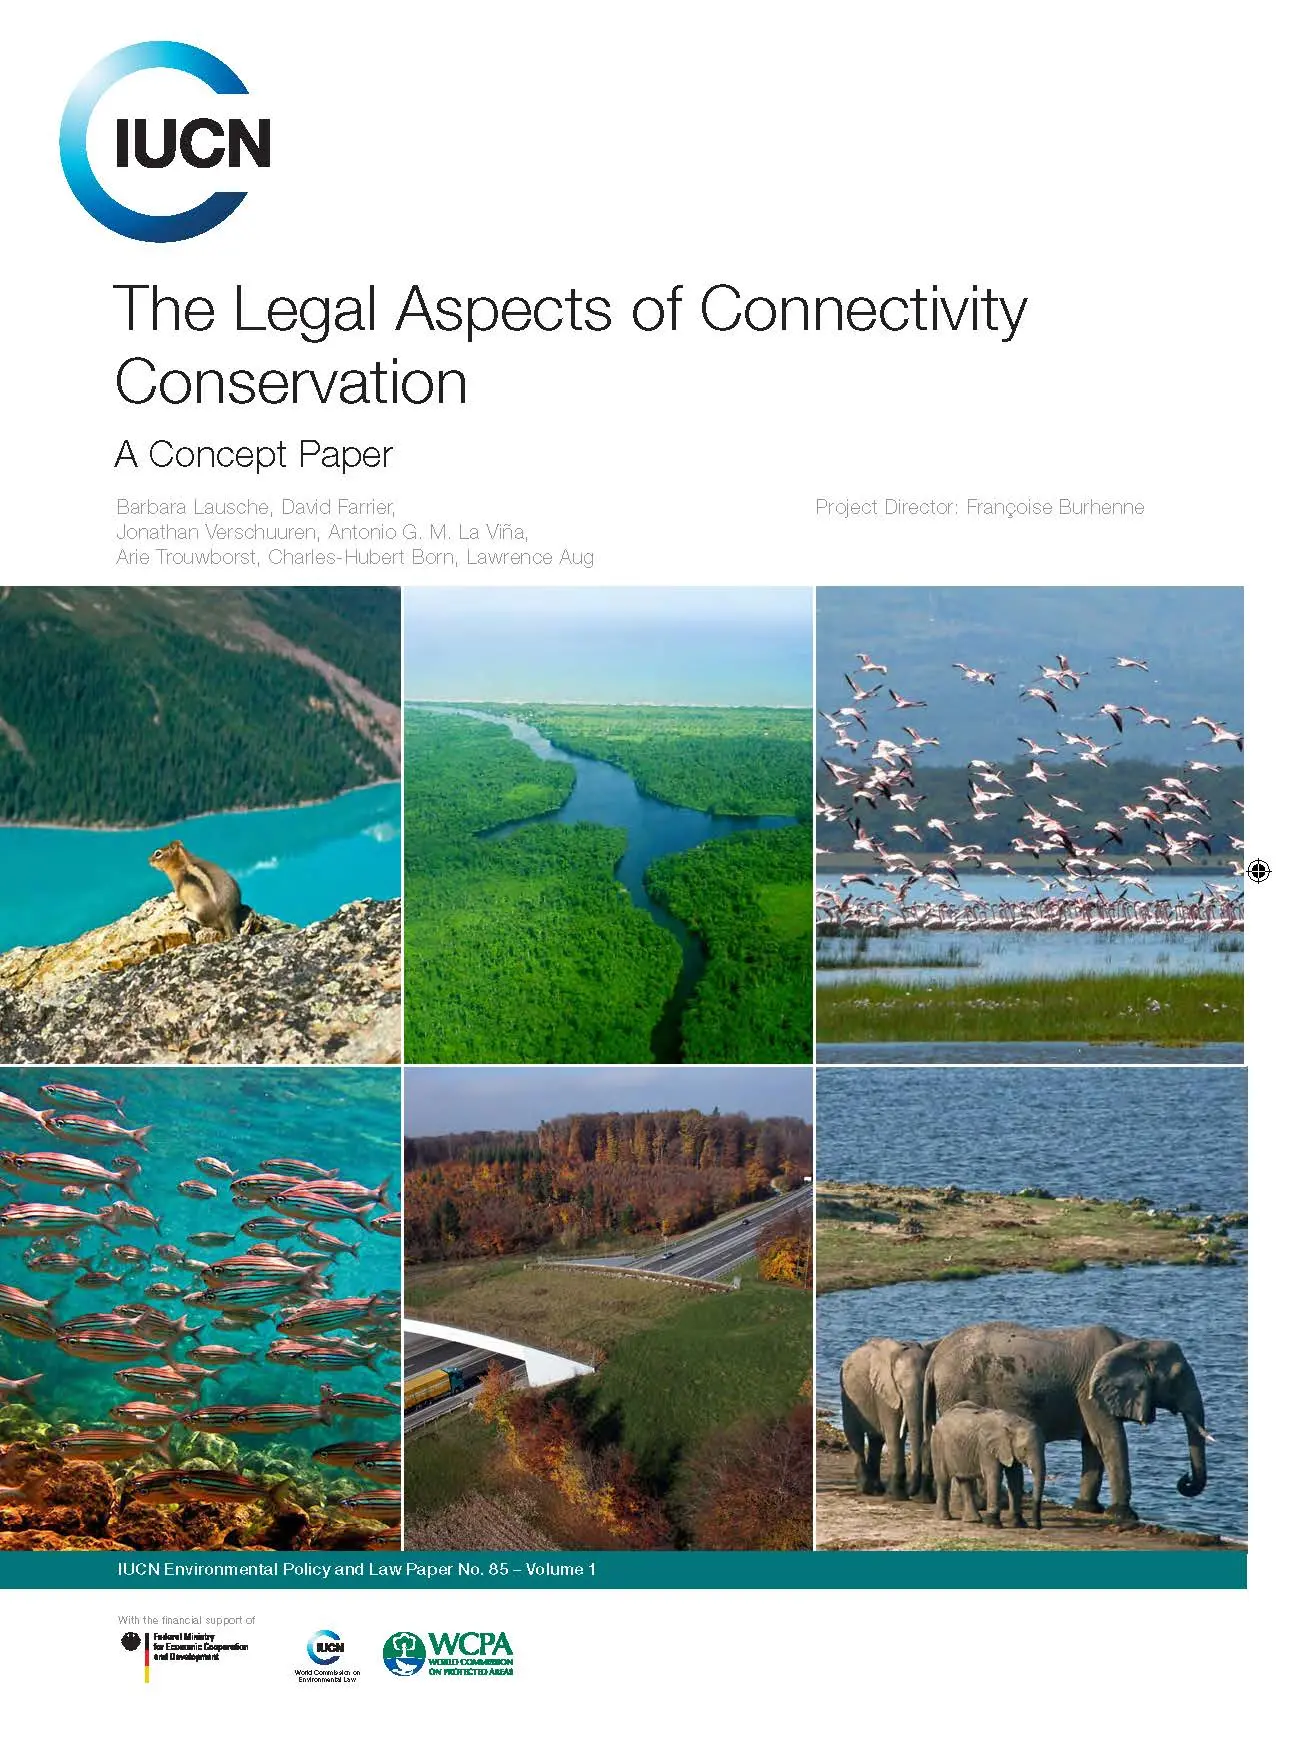 The legal aspects of connectivity conservation